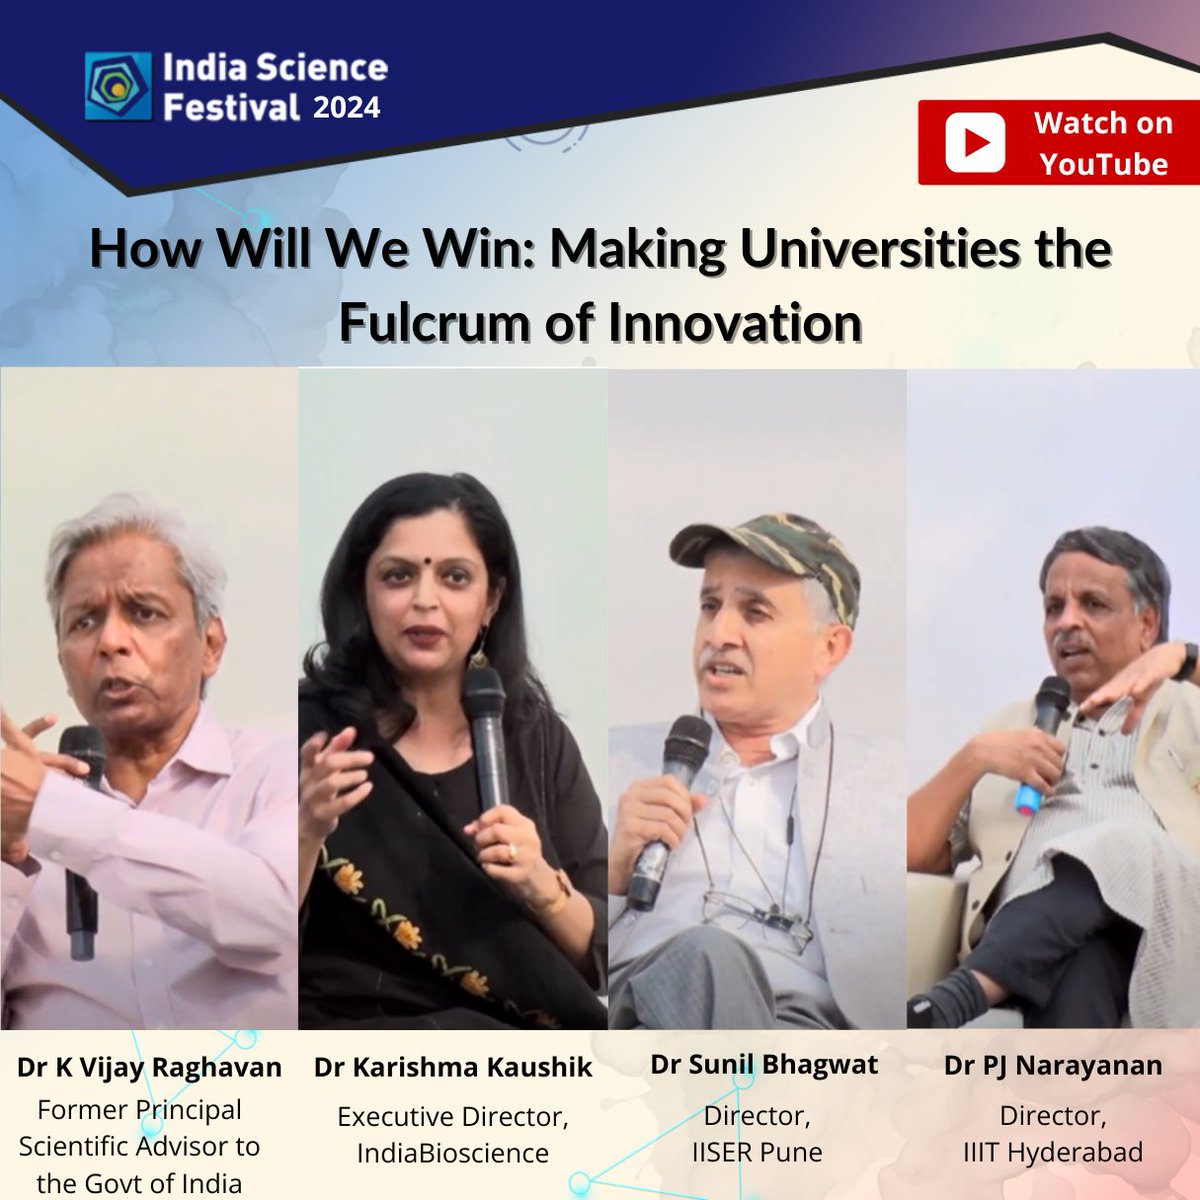 Watch this panel discussion from #ISF2024 on YouTube! Featuring esteemed panellists @PJNarayanan, @_KarishmaK, and Dr. Sunil Bhagwat, moderated by @kvijayraghavan as they discussed how Indian institutions can foster innovation and entrepreneurial culture. youtube.com/watch?v=0-ebXv…